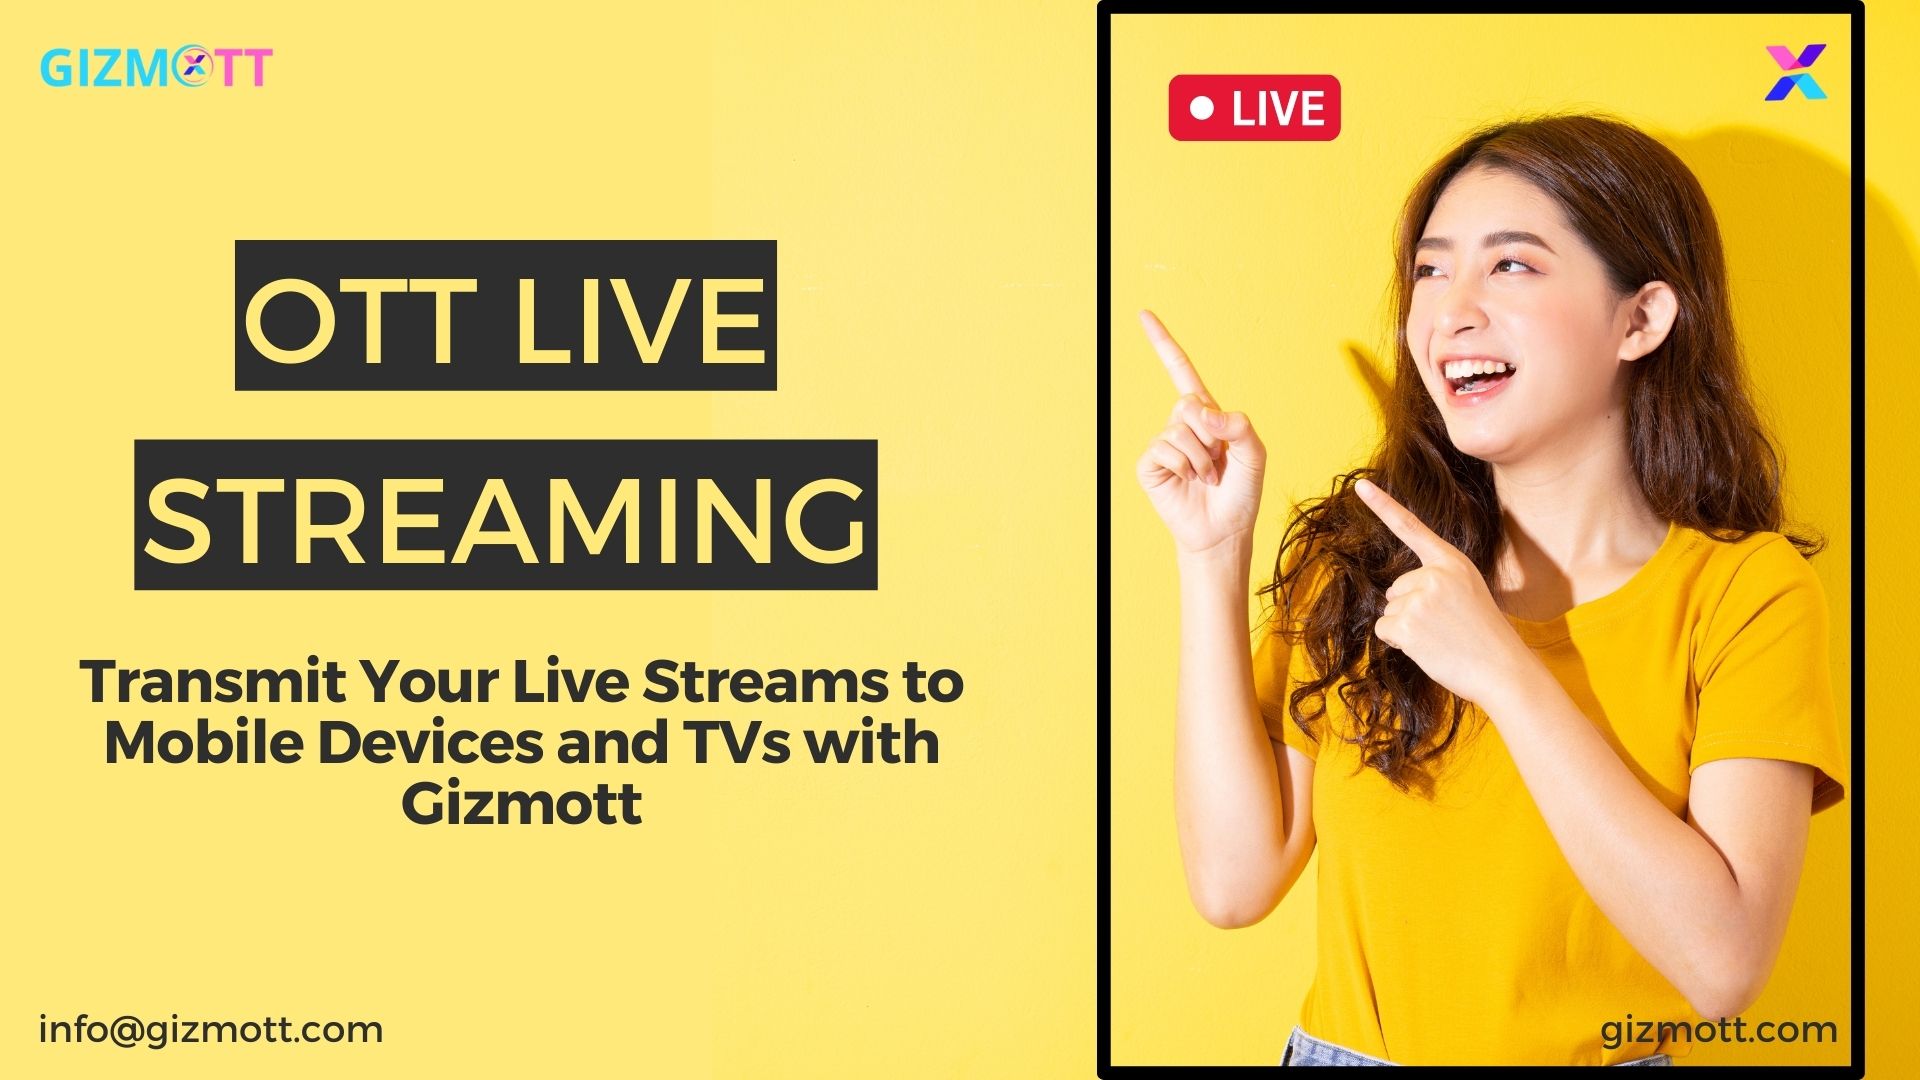 Transmit Your Live Streams to Mobile Devices and TVs with Gizmott